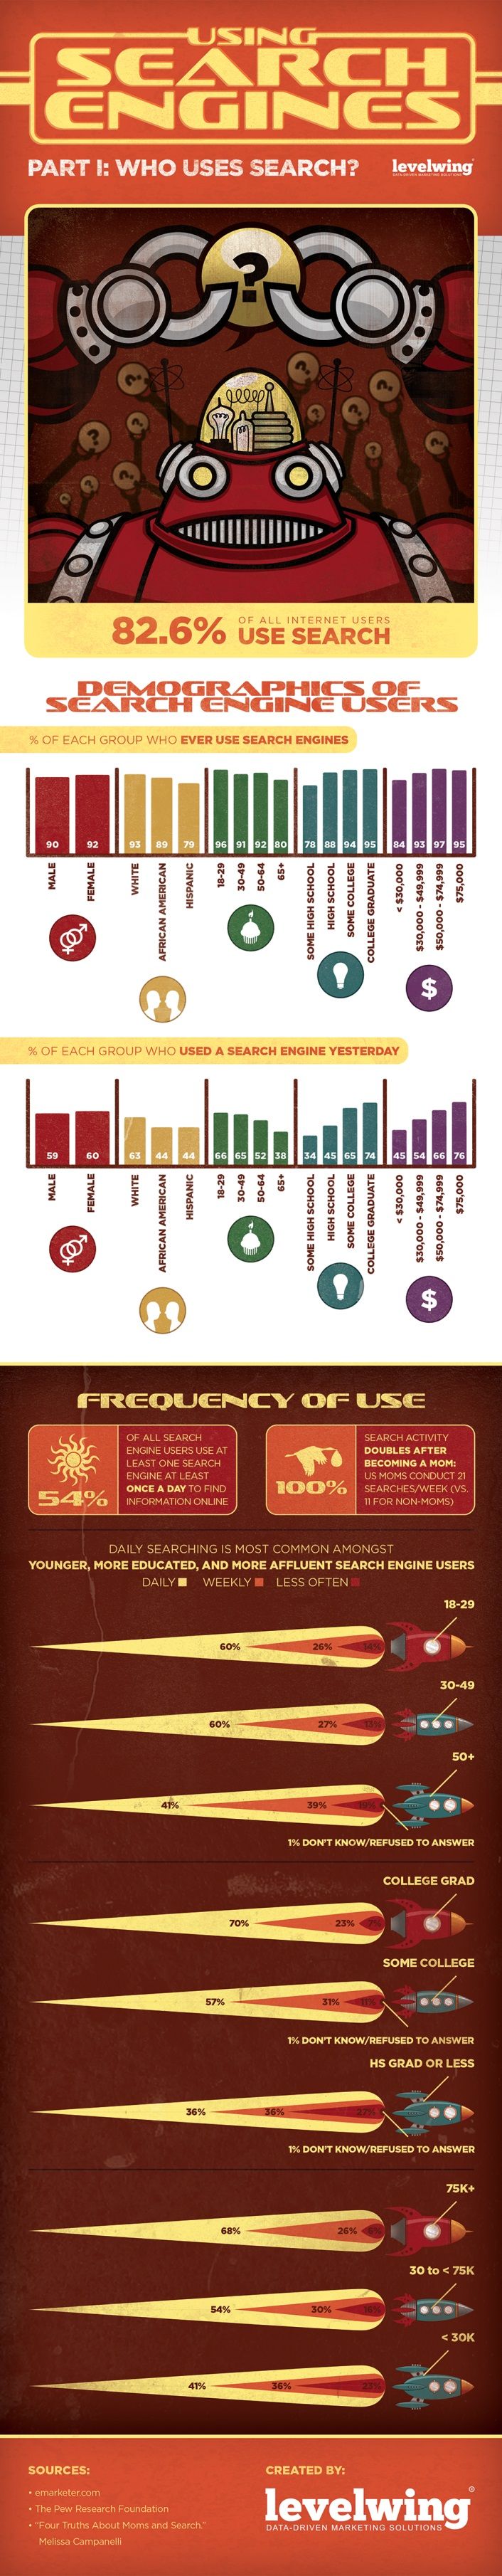 Advertising-Infographics-Search-Engine-Marketing-Who-Uses-Search-Infographic-MarketingProfs-Articl Advertising Infographics : Search Engine Marketing - Who Uses Search? [Infographic] : MarketingProfs Articl...